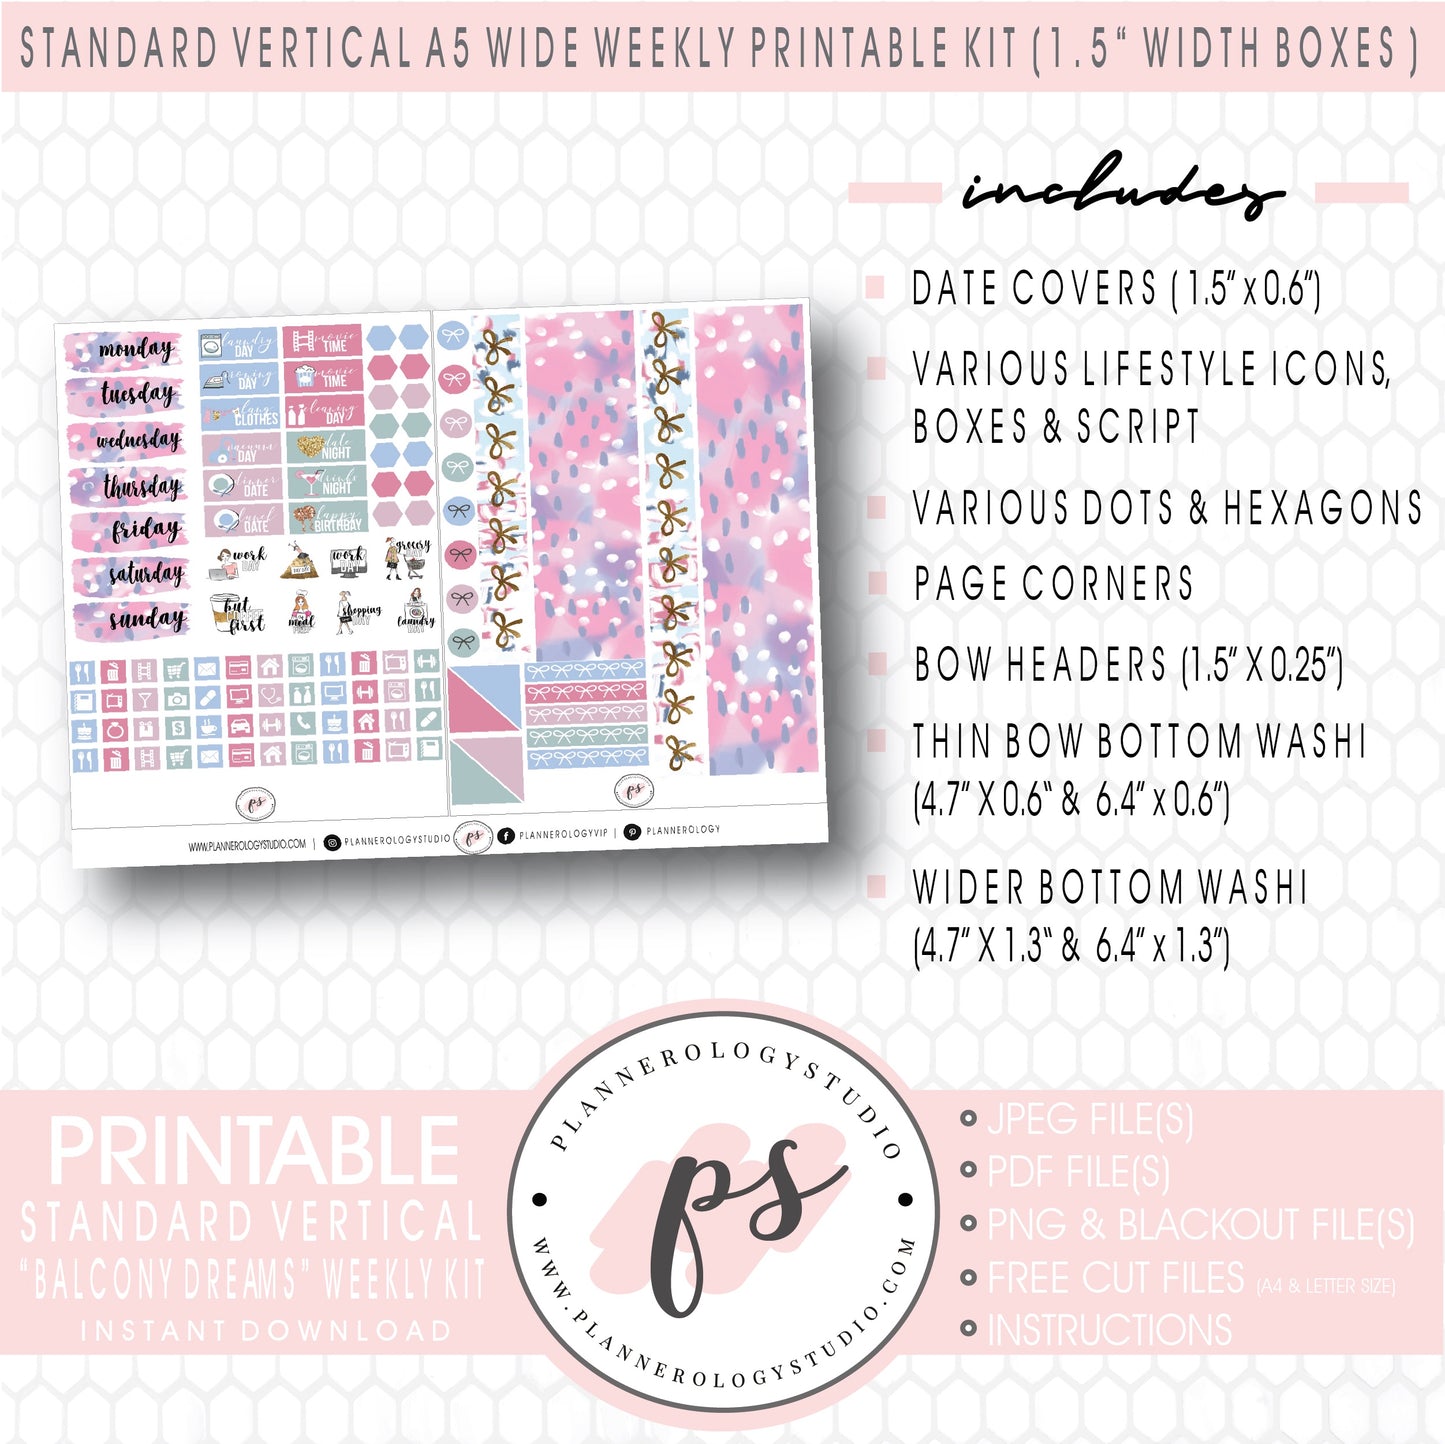 Balcony Dreams Weekly Digital Printable Planner Stickers Kit (for use with Standard Vertical A5 Wide Planners)